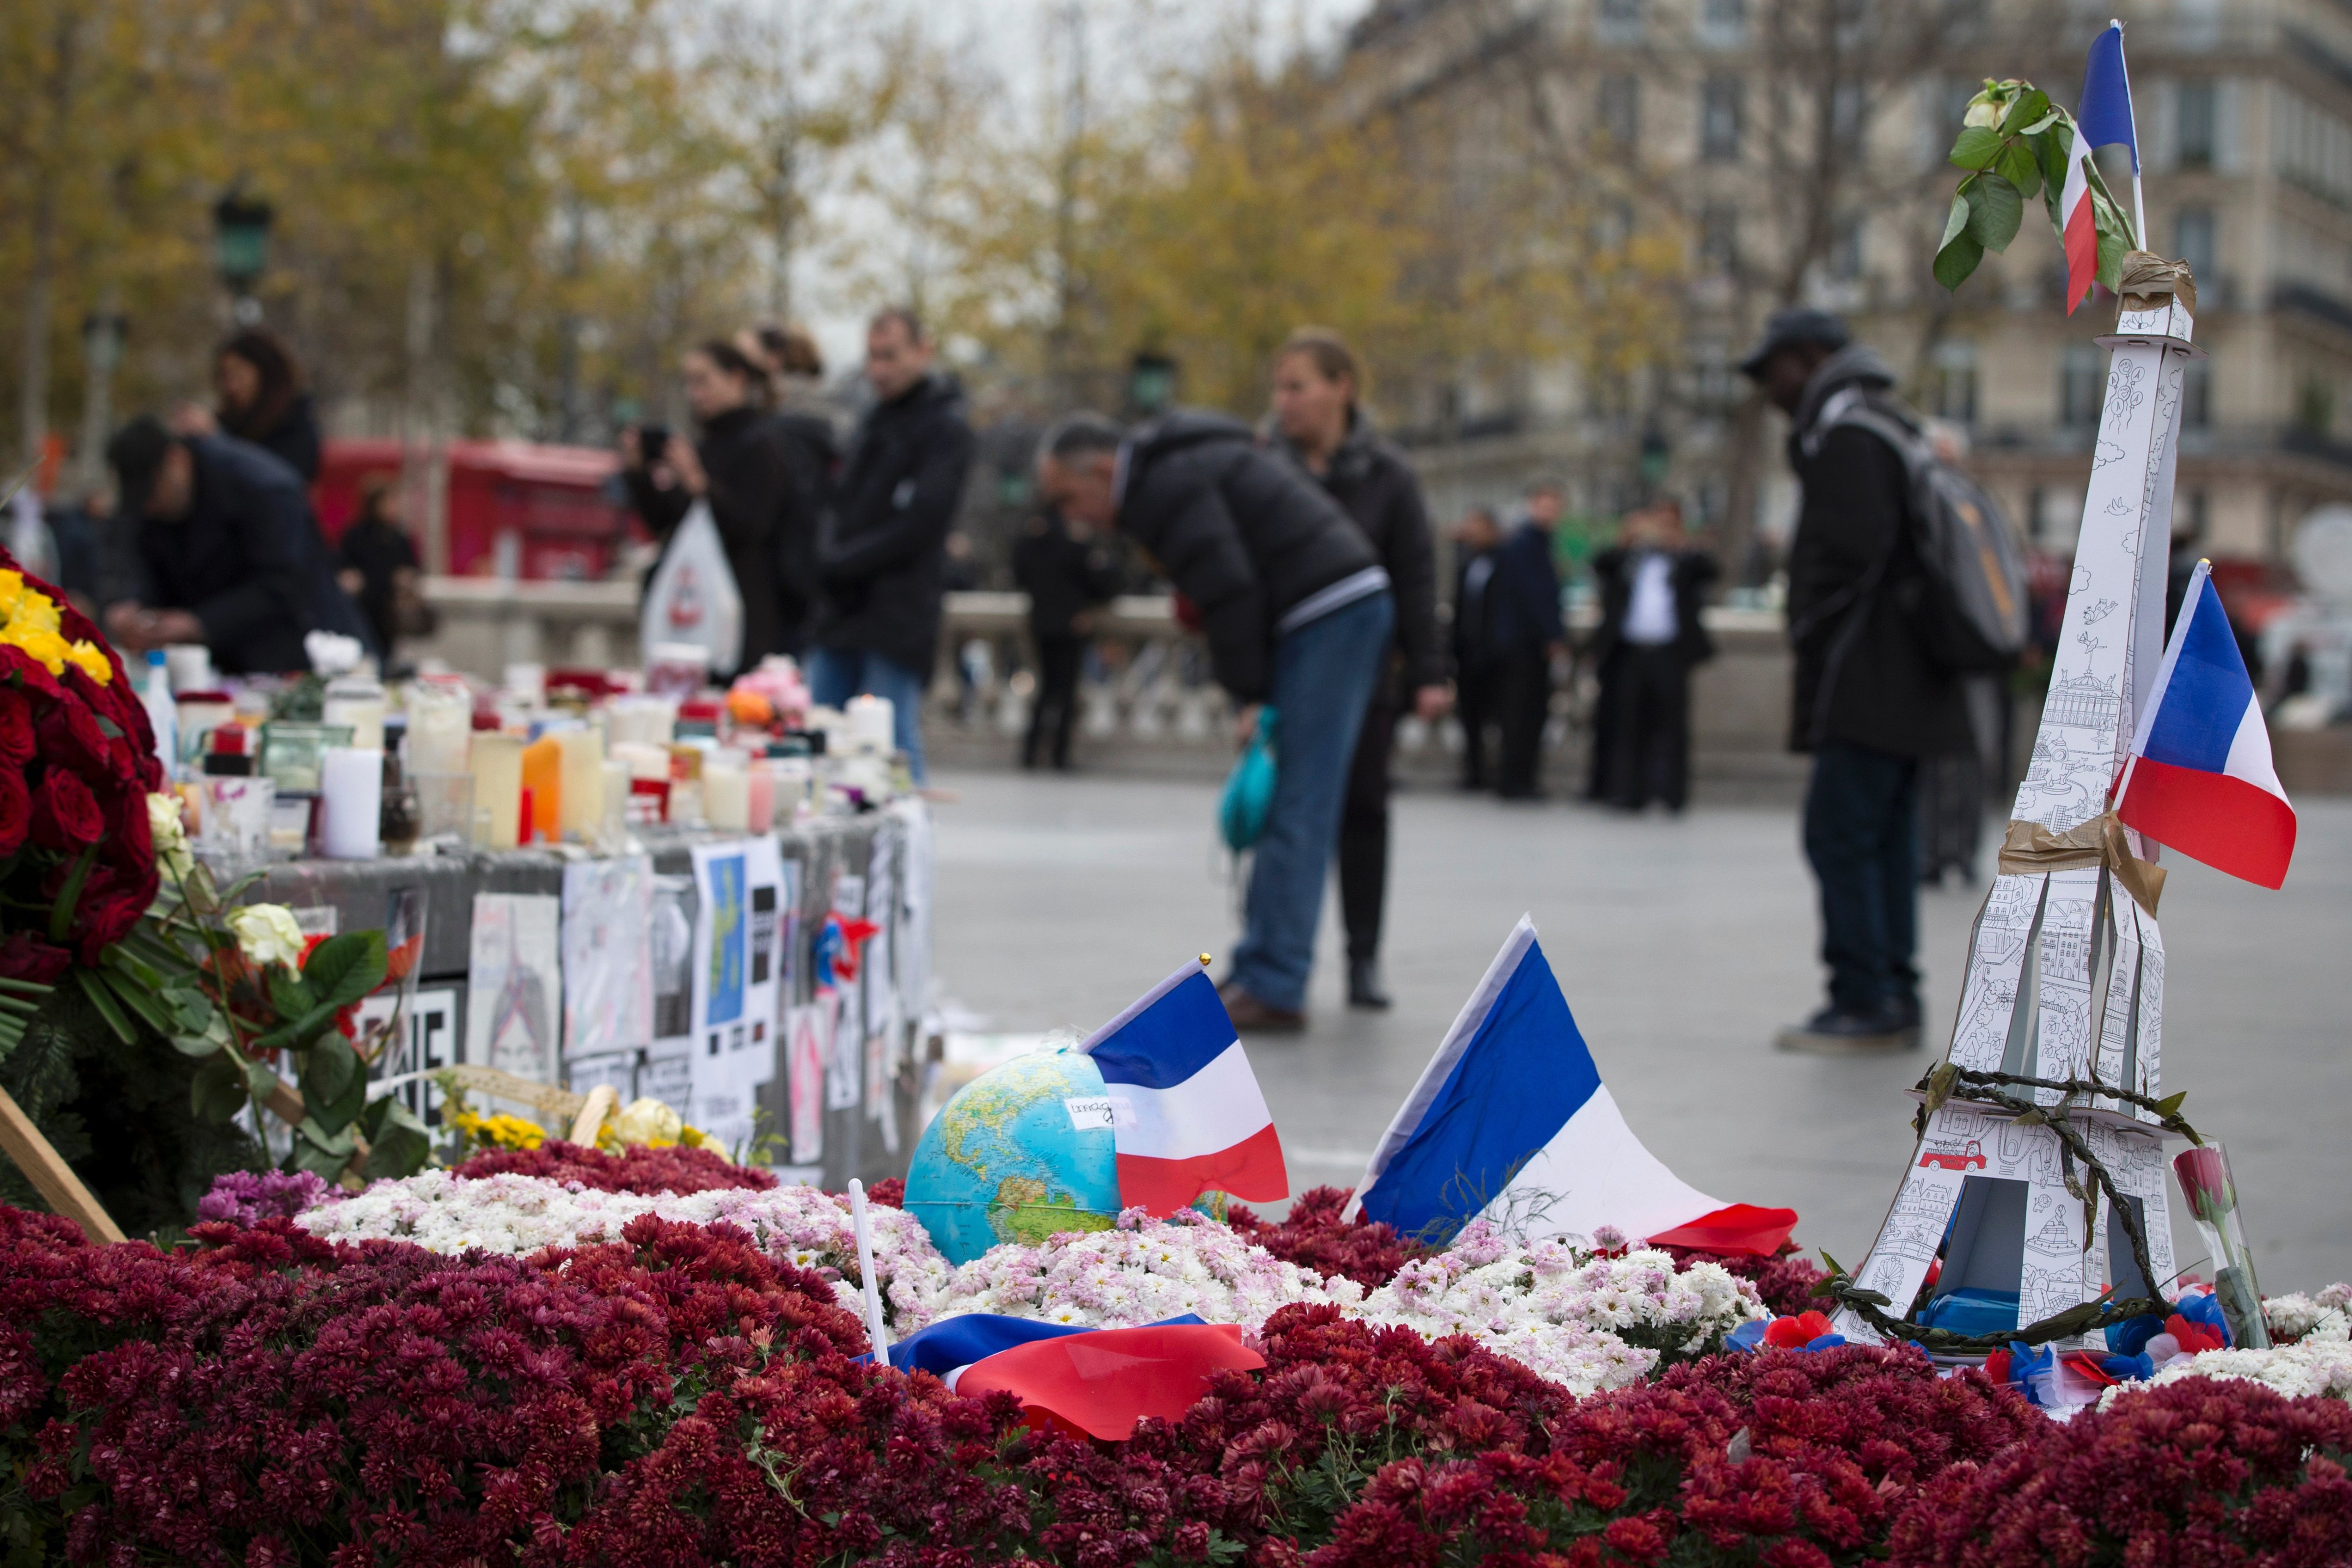 People stand on the Place de la Republique in Paris on December 2, 2015, next to a model Eiffel Tower, flowers and French flags layed in memory of the victims of the deadly attacks in and around Paris on Nov. 13. (Joel Saget—AFP/Getty Images)